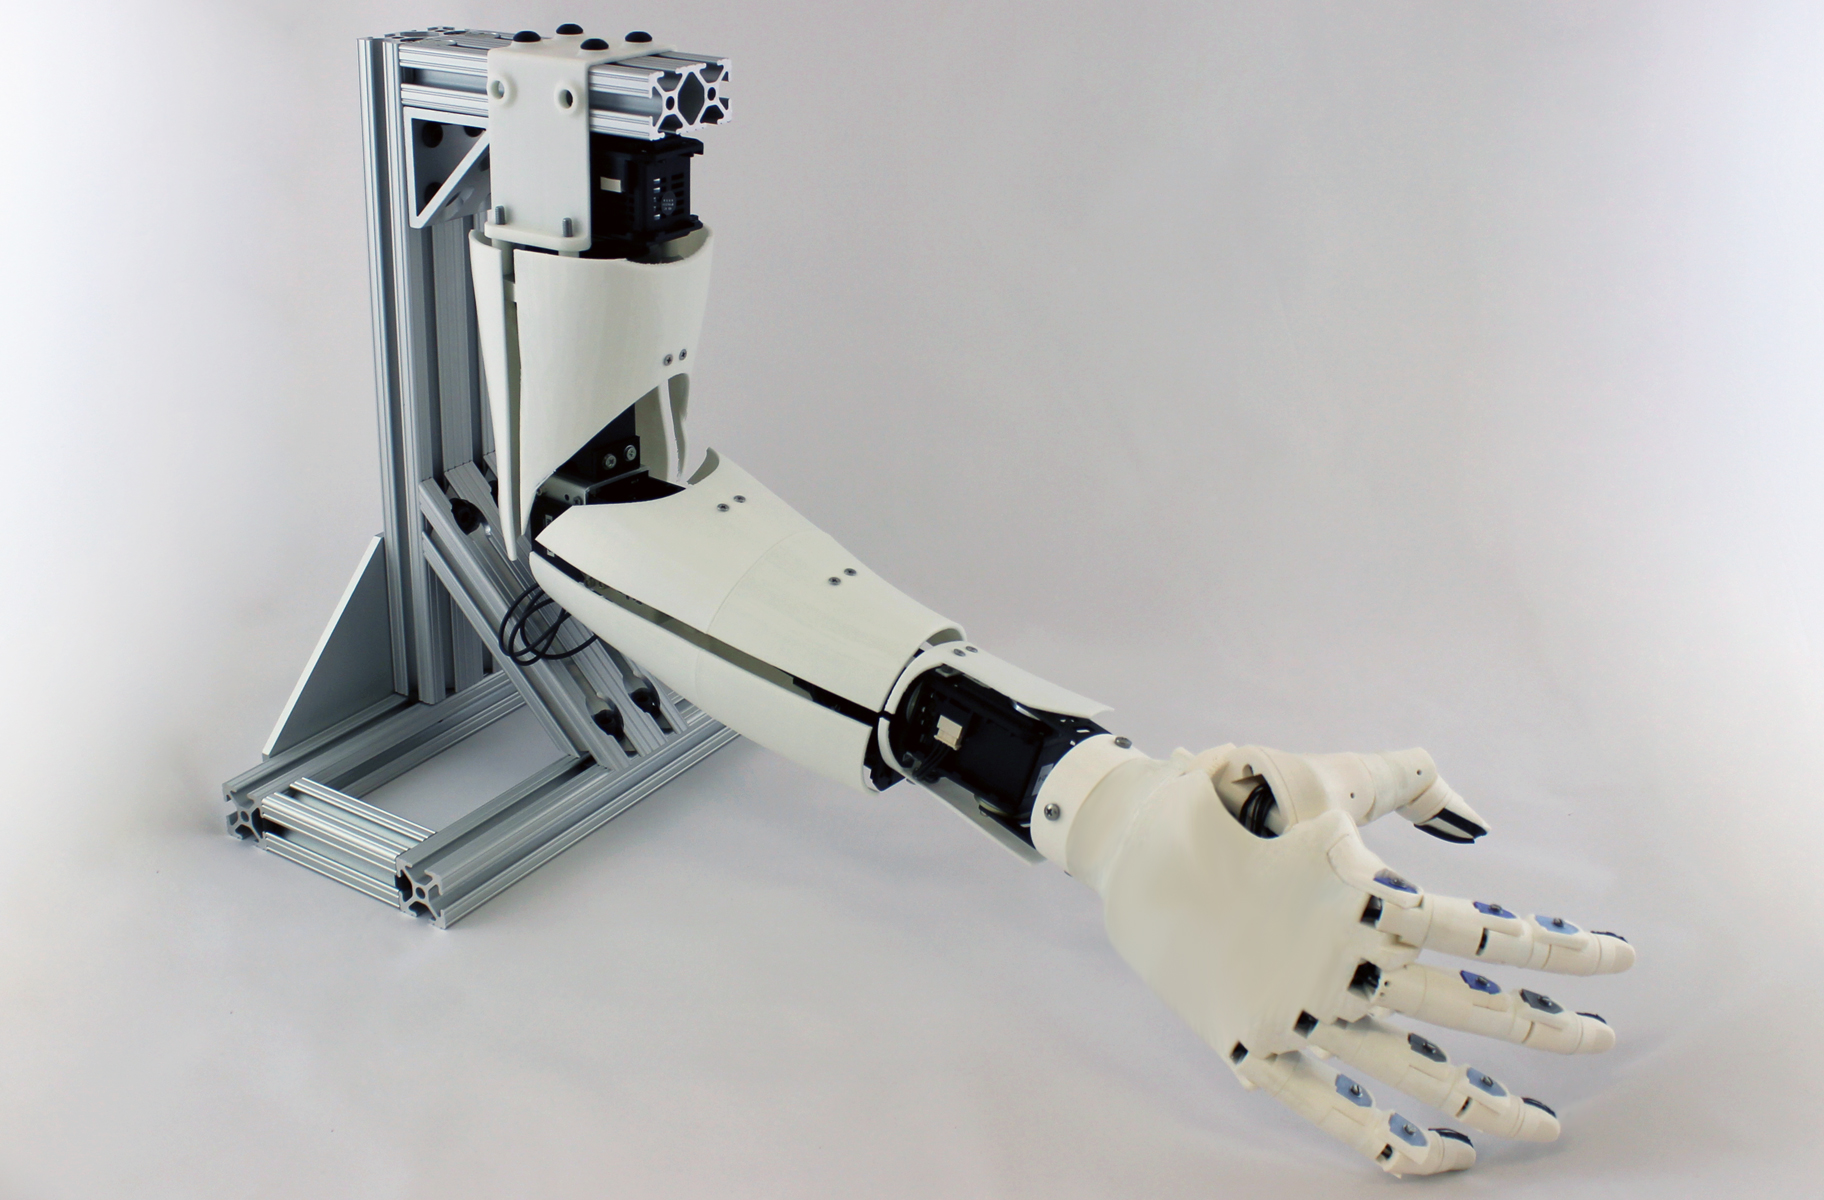 The Bento Arm and HANDi Hand - Bionic Limbs for Improved Natural Control